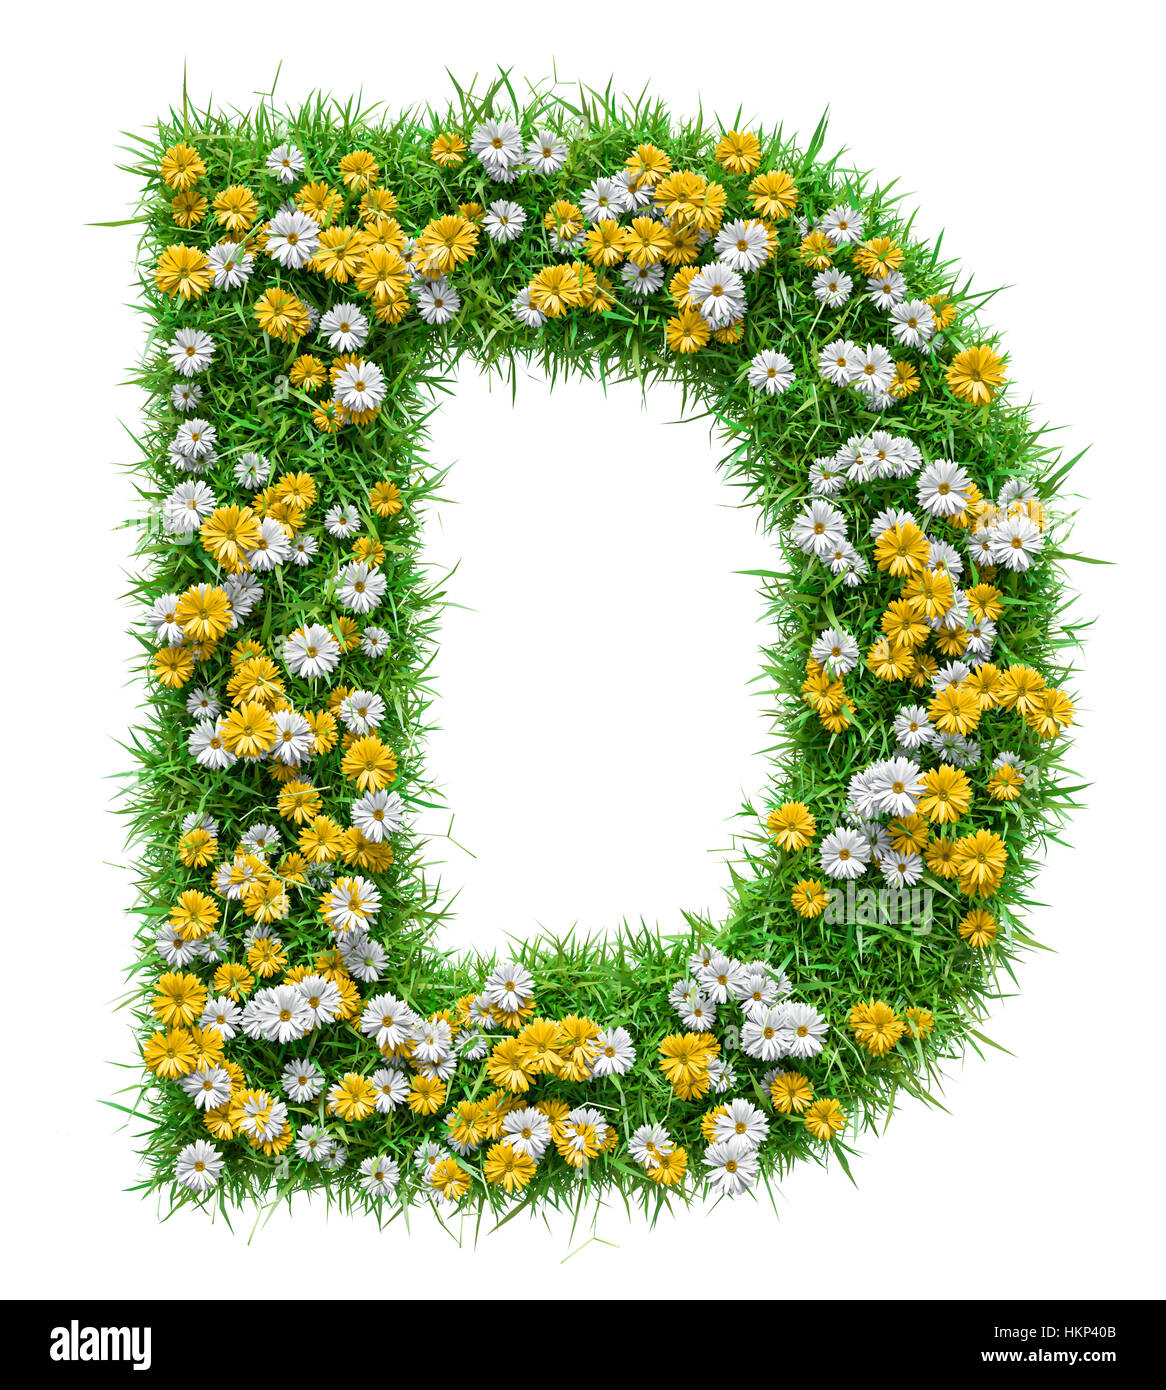 Letter D Of Green Grass And Flowers Stock Photo